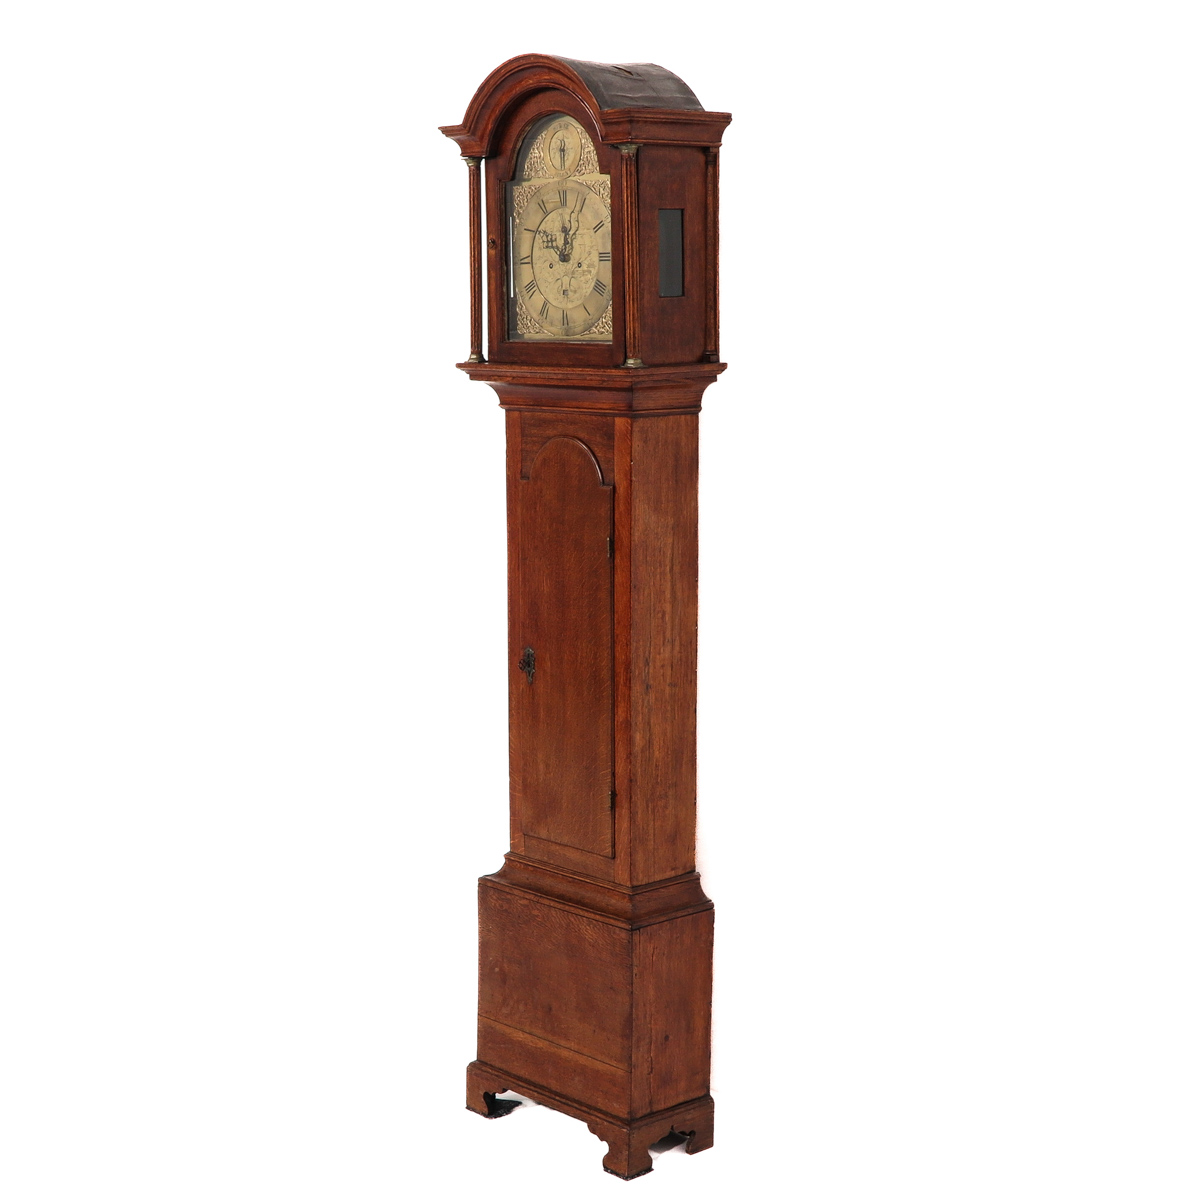 A Long Case Clock - Image 3 of 9